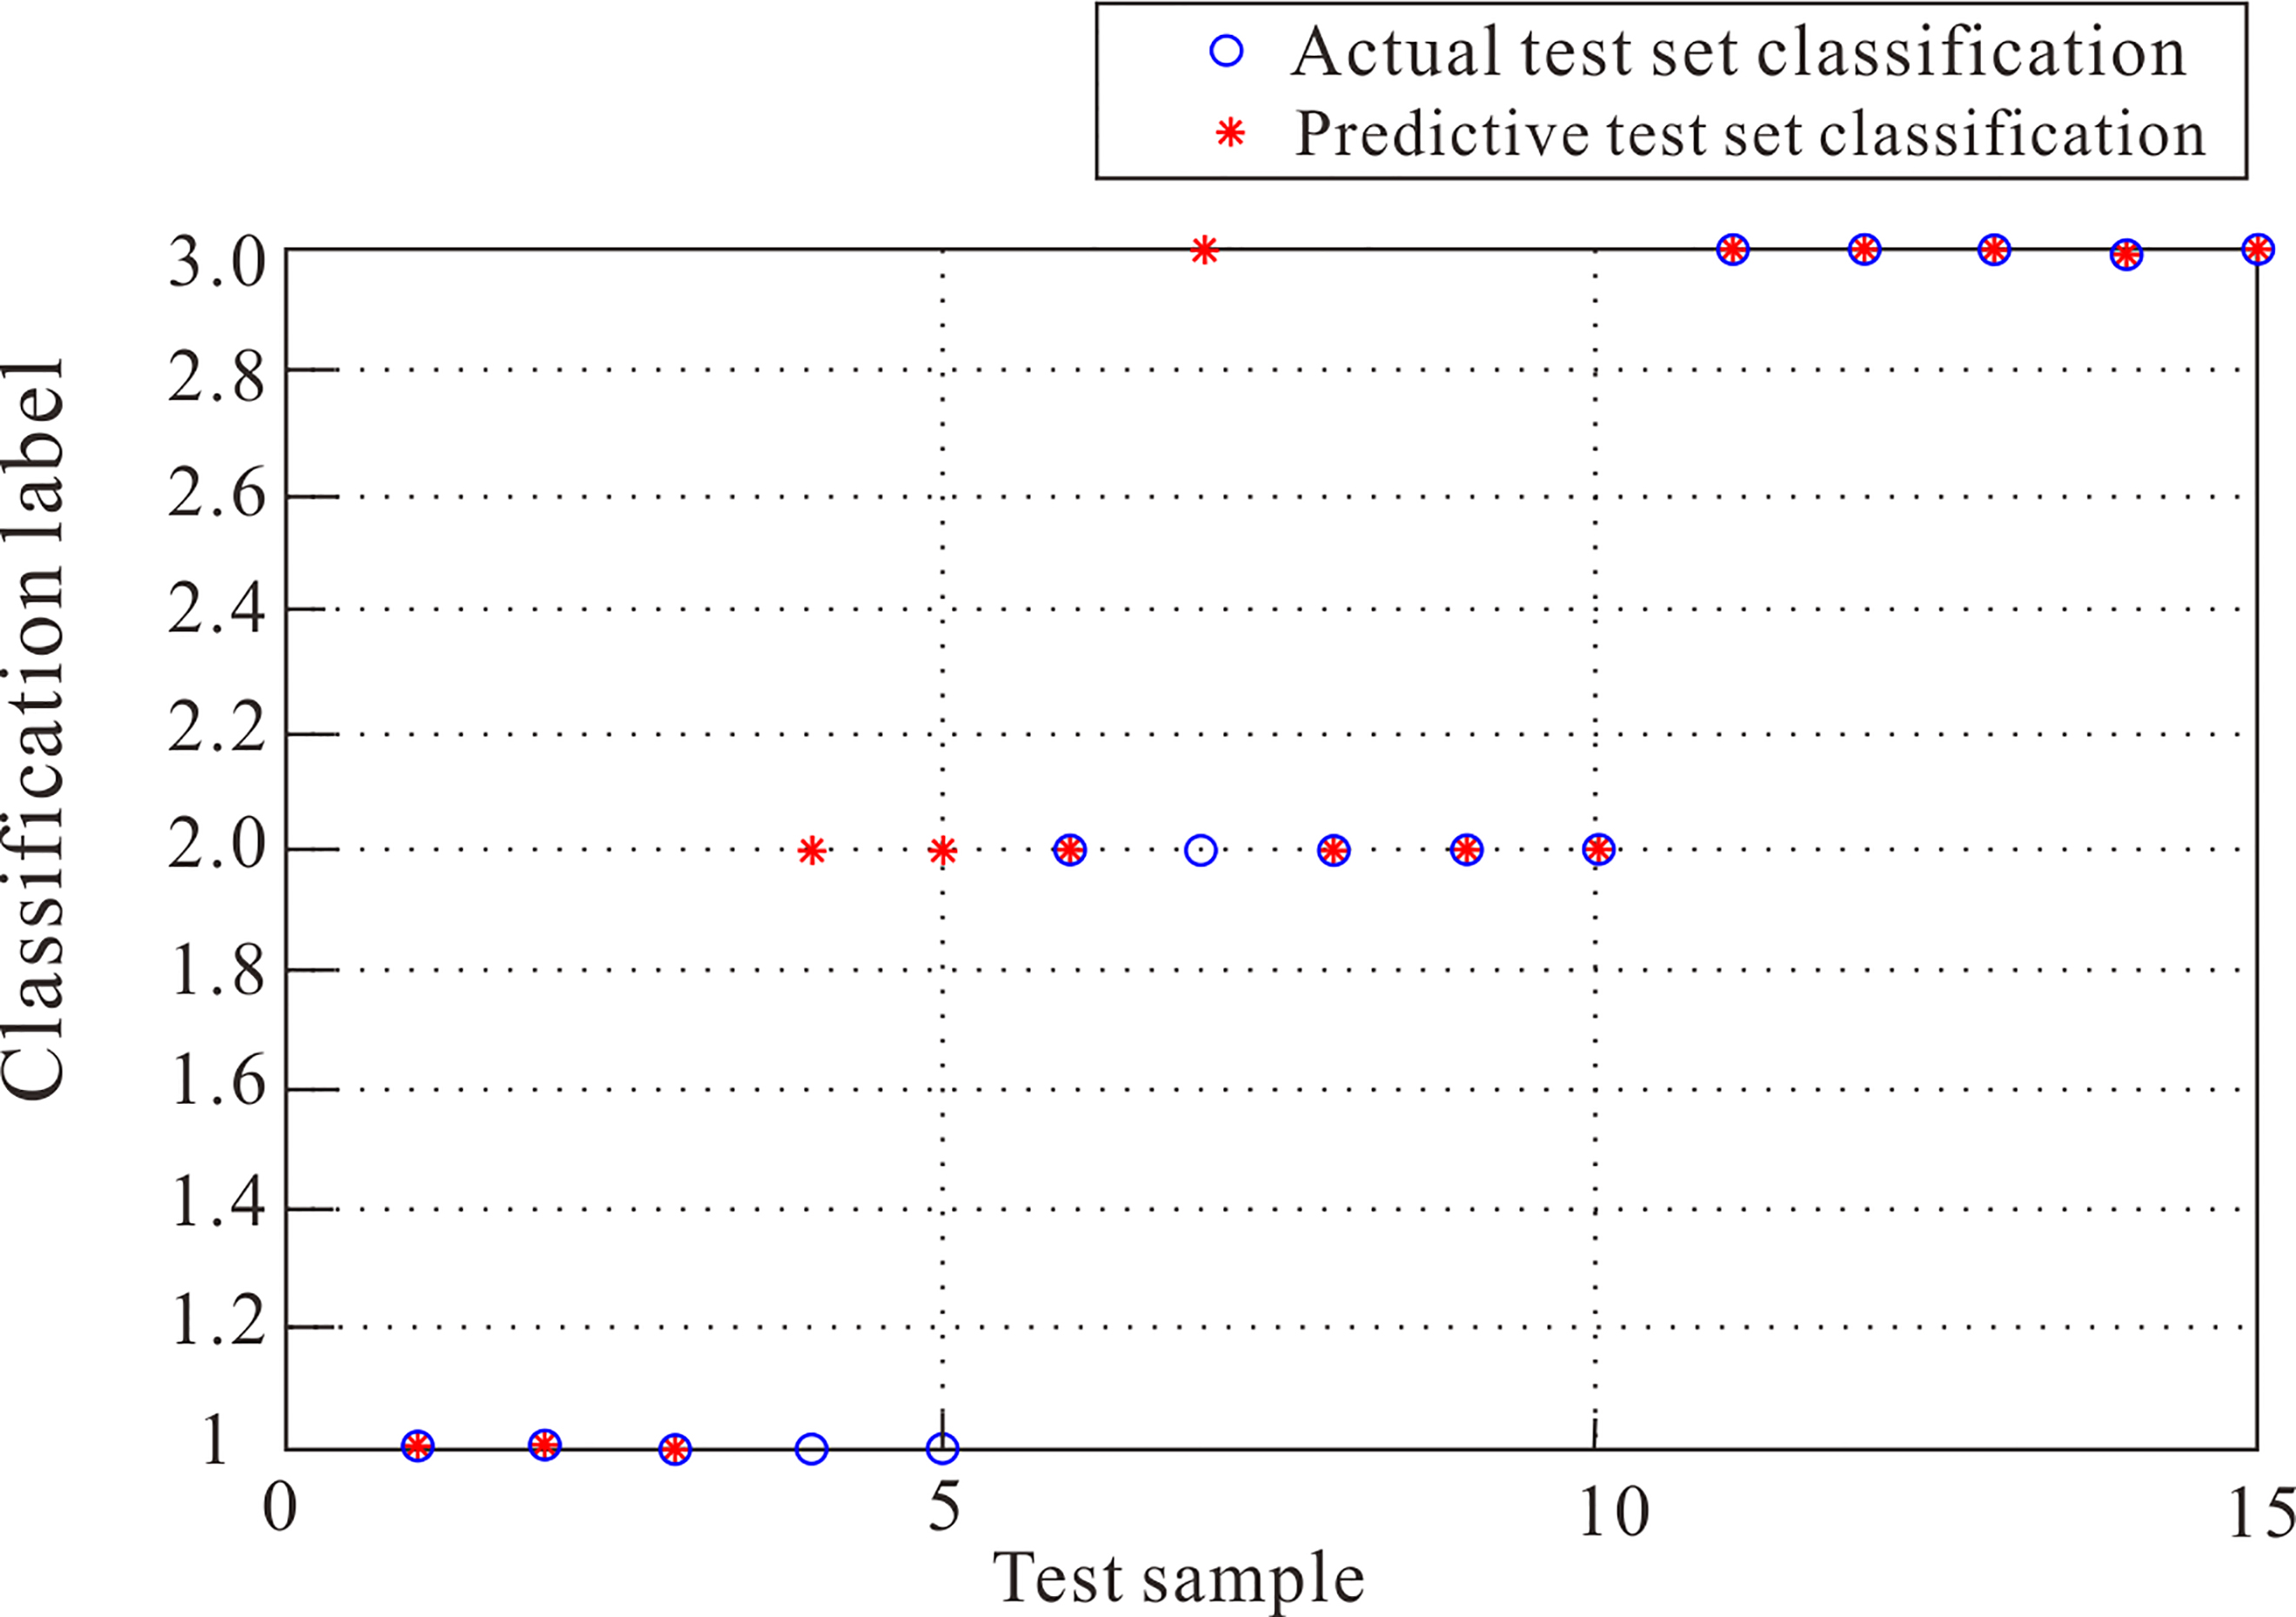 Actual and predictive classifications of test set.